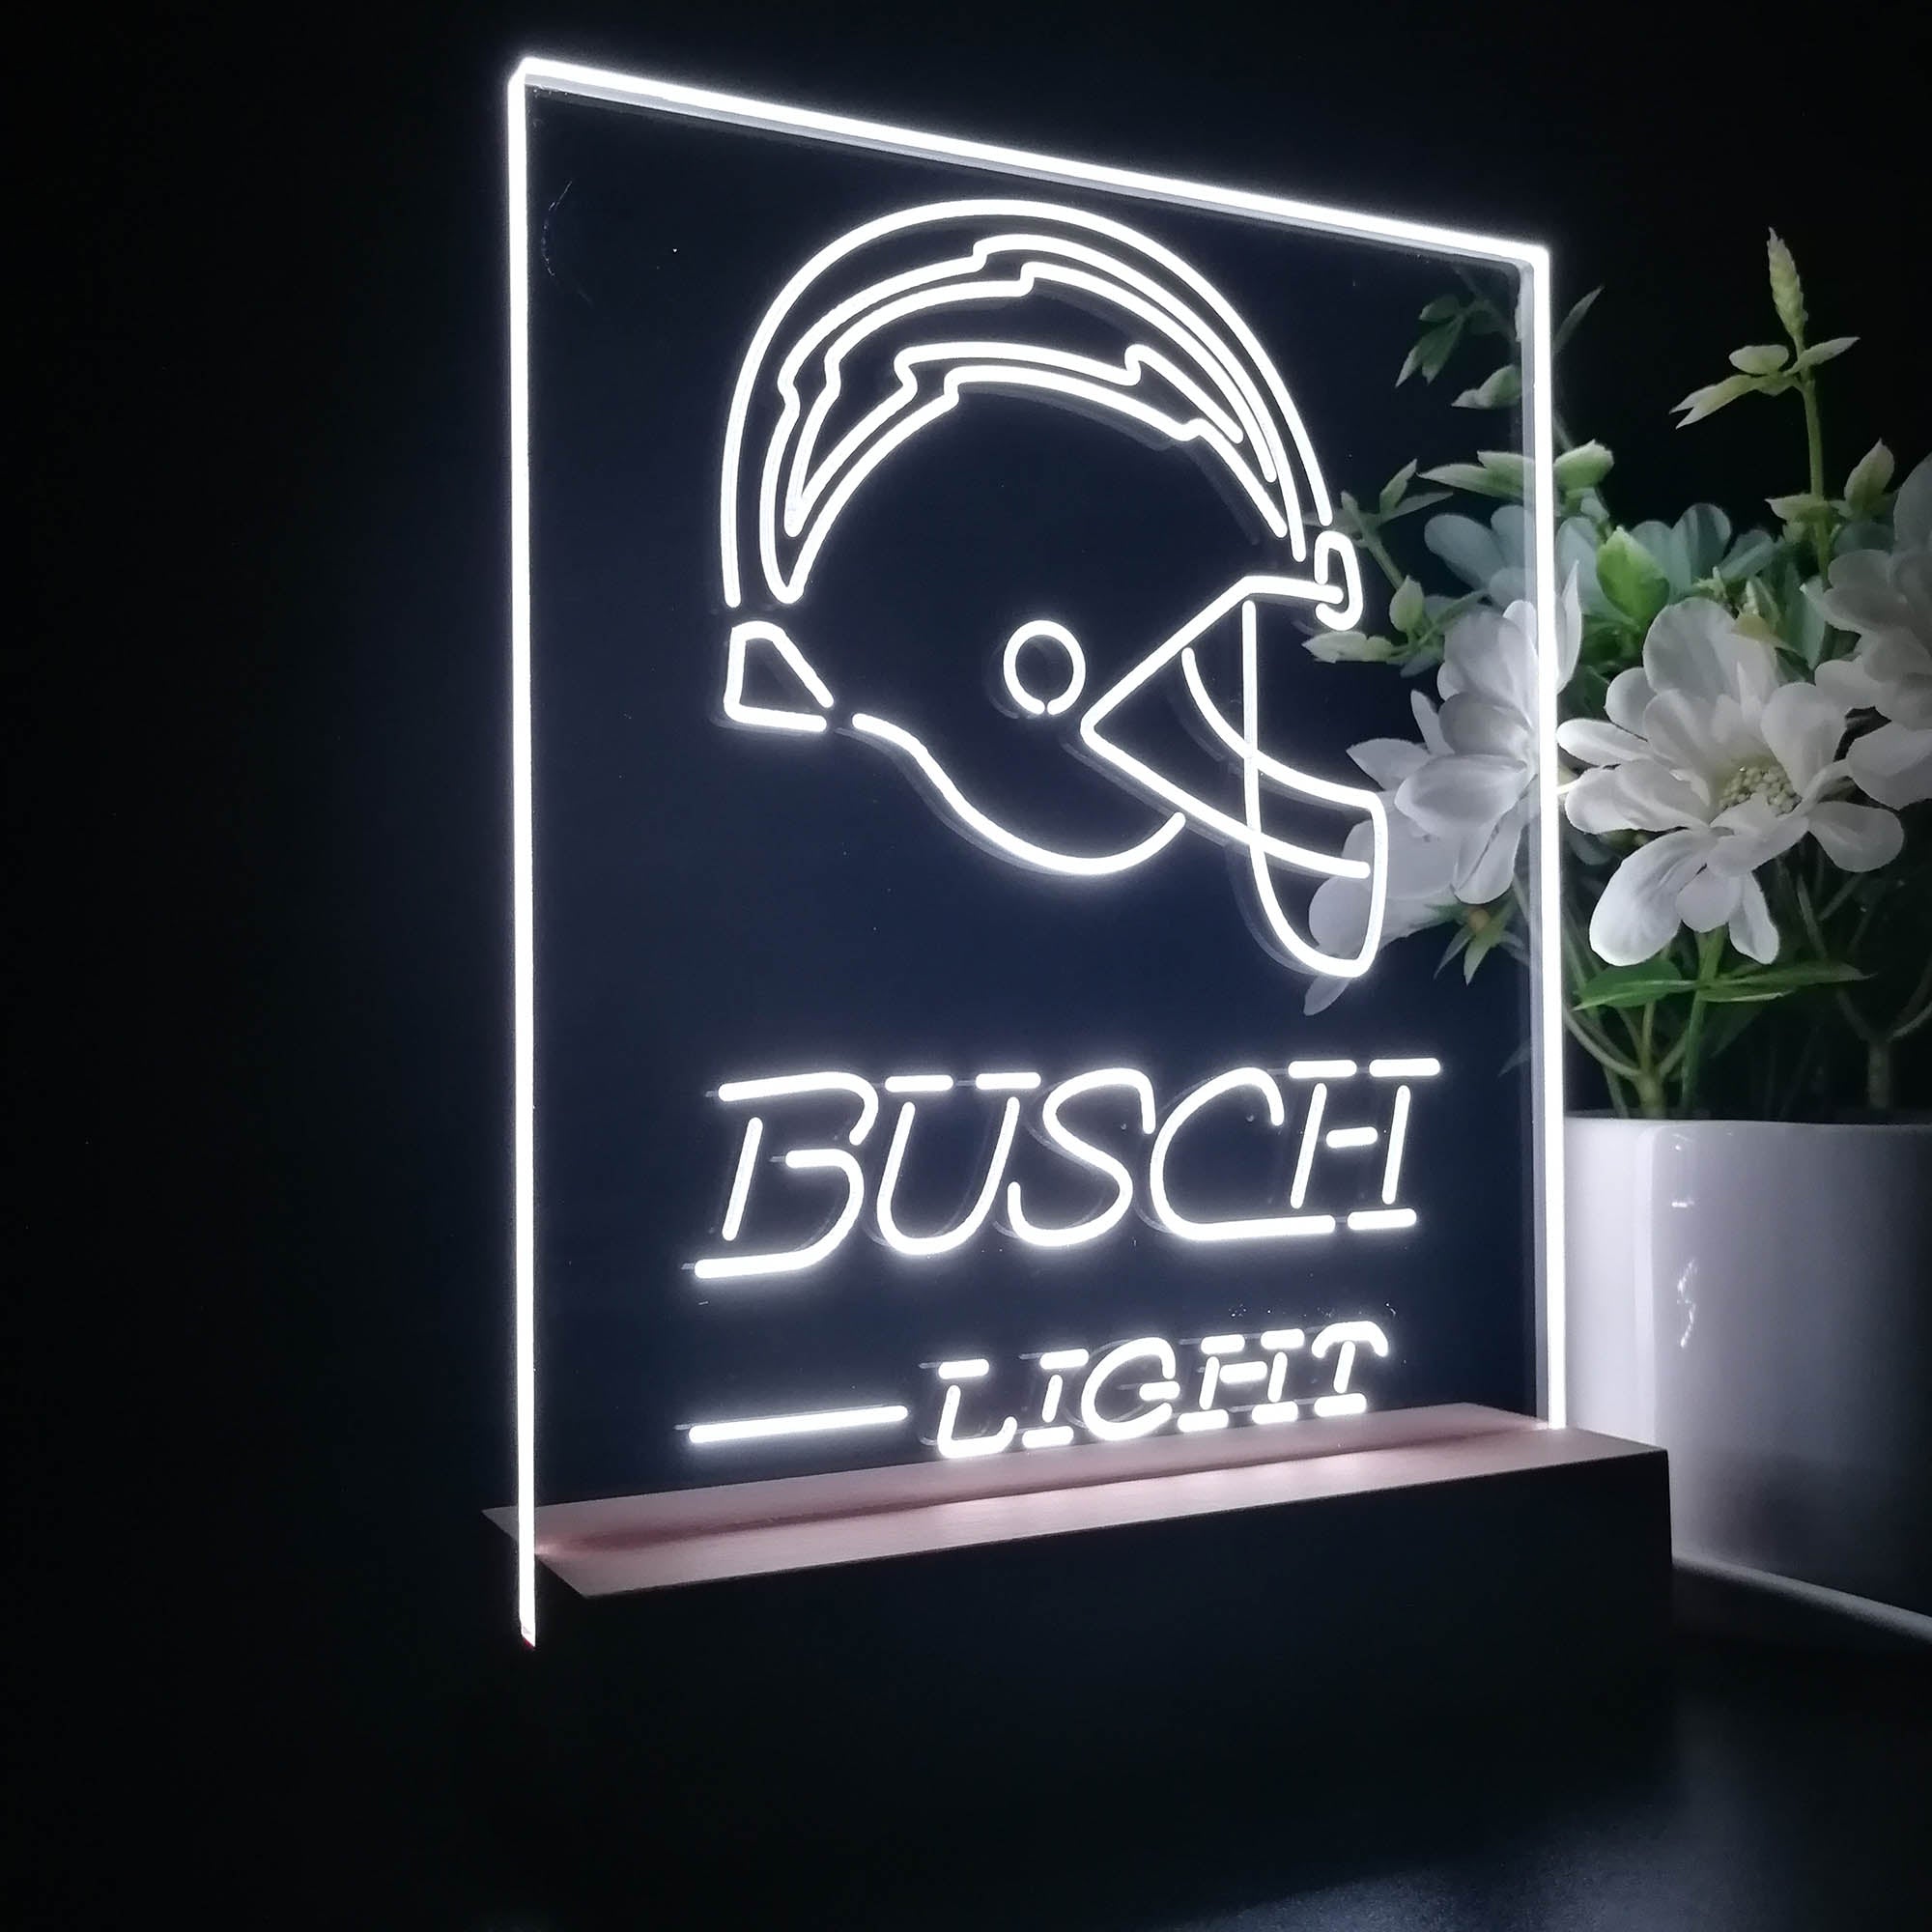 San Diego Chargers Busch Light 3D LED Optical Illusion Sport Team Night Light